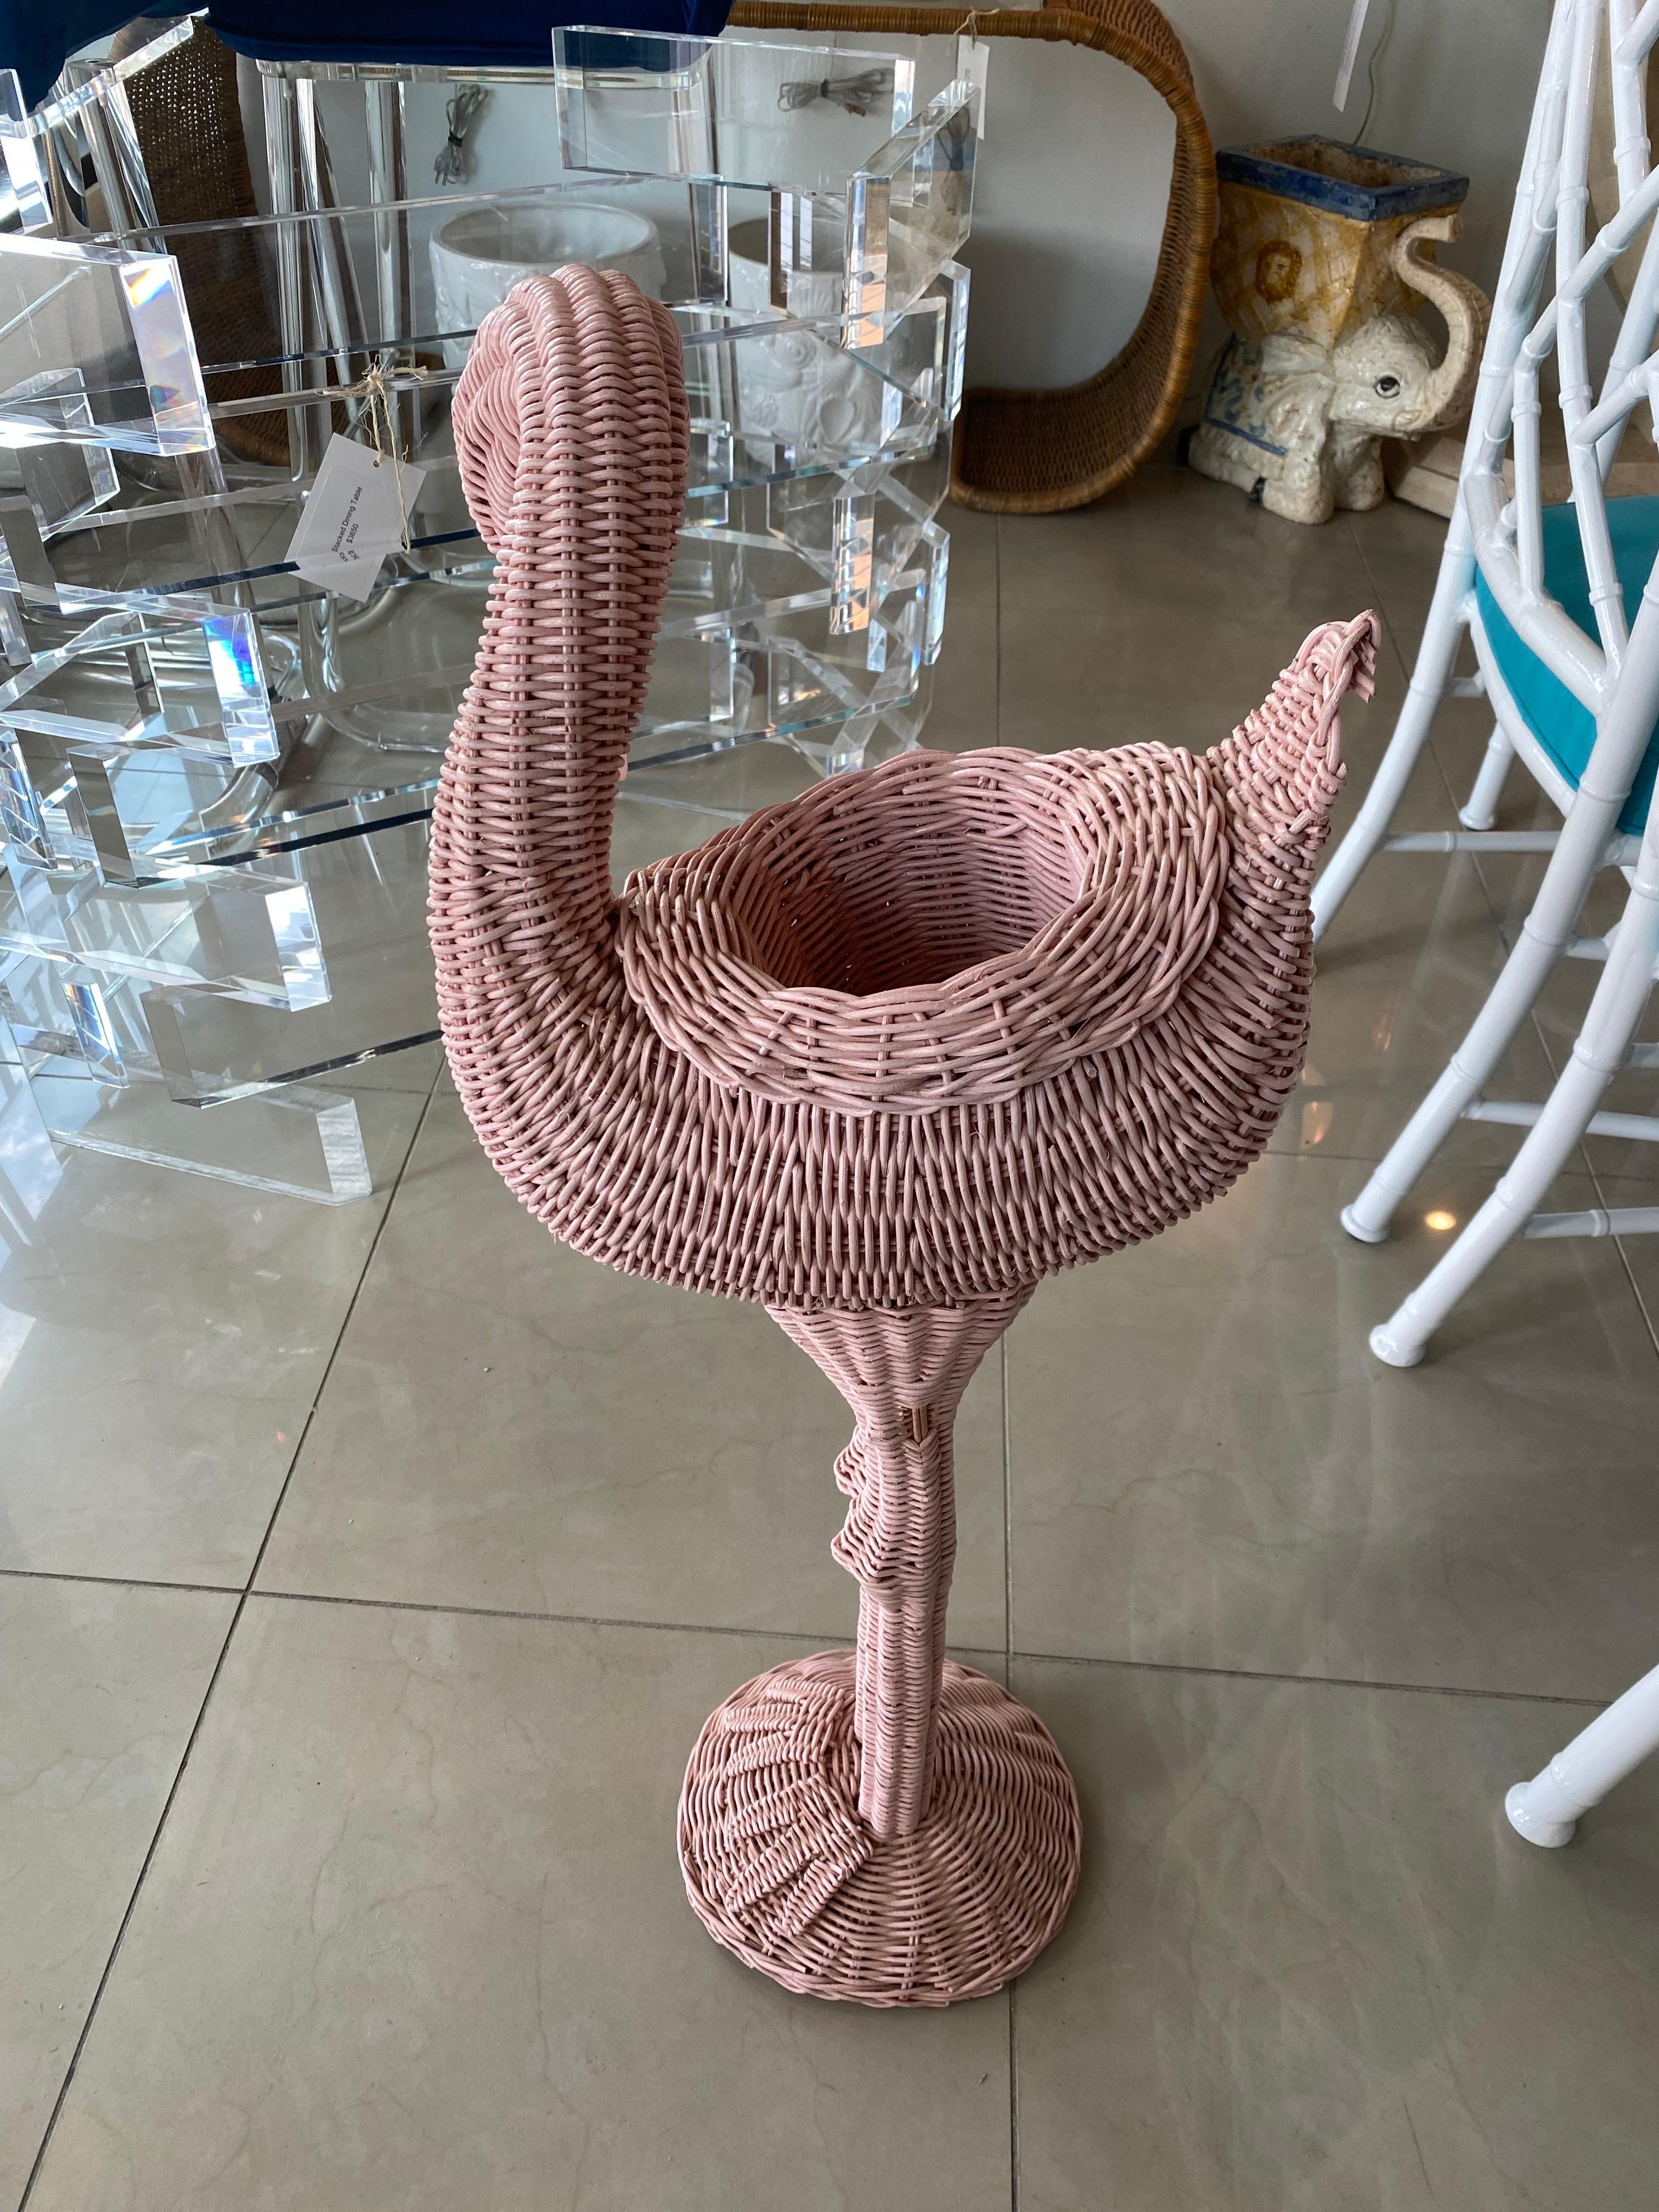 American Vintage Palm Beach Pink Wicker Flamingo Plant Stand Pot Holder Garden For Sale